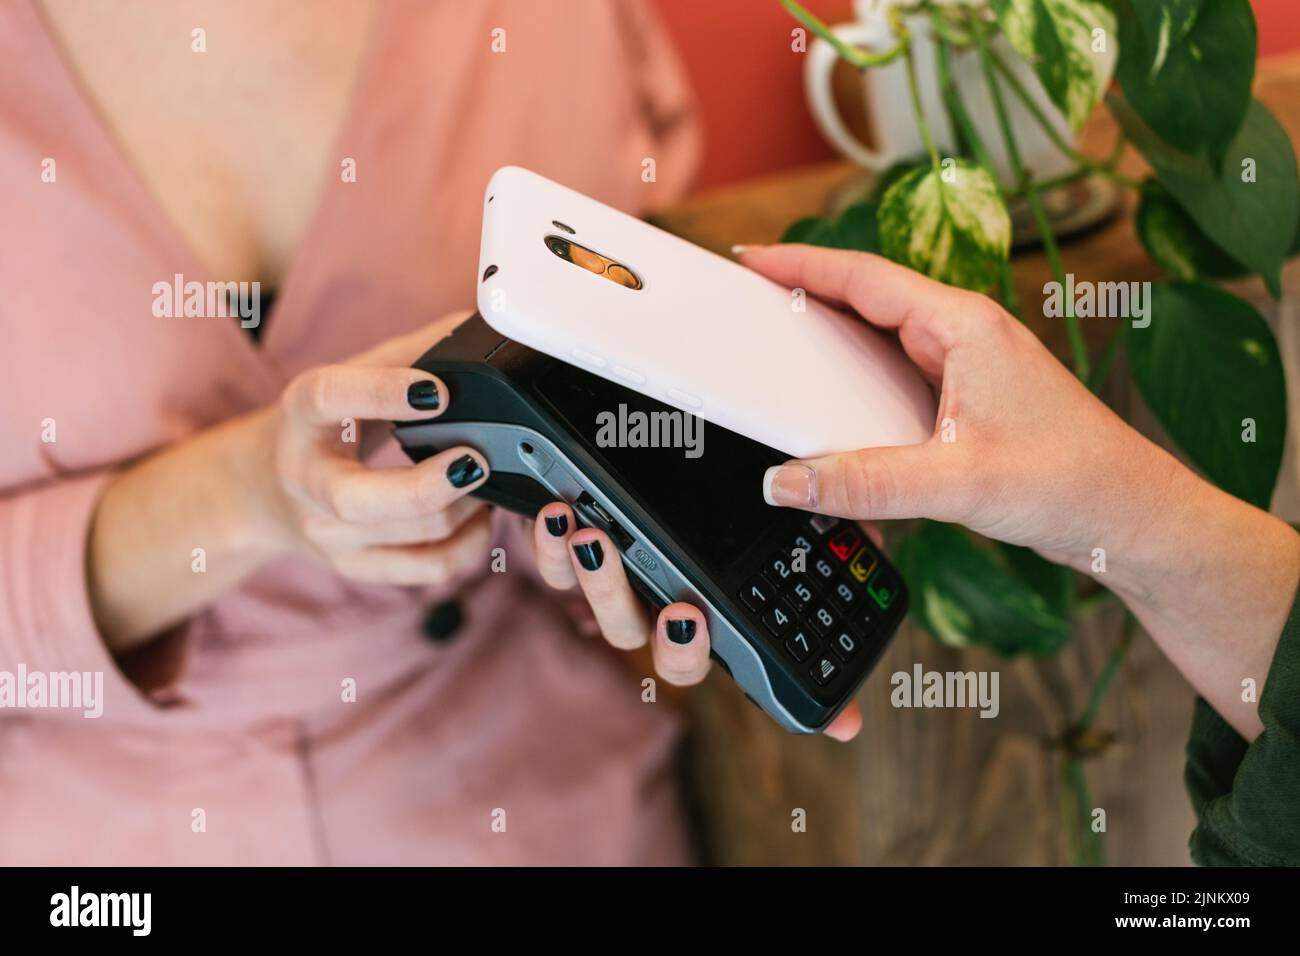 paying, cashless, card reader, mobiles bezahlen, card readers Stock Photo